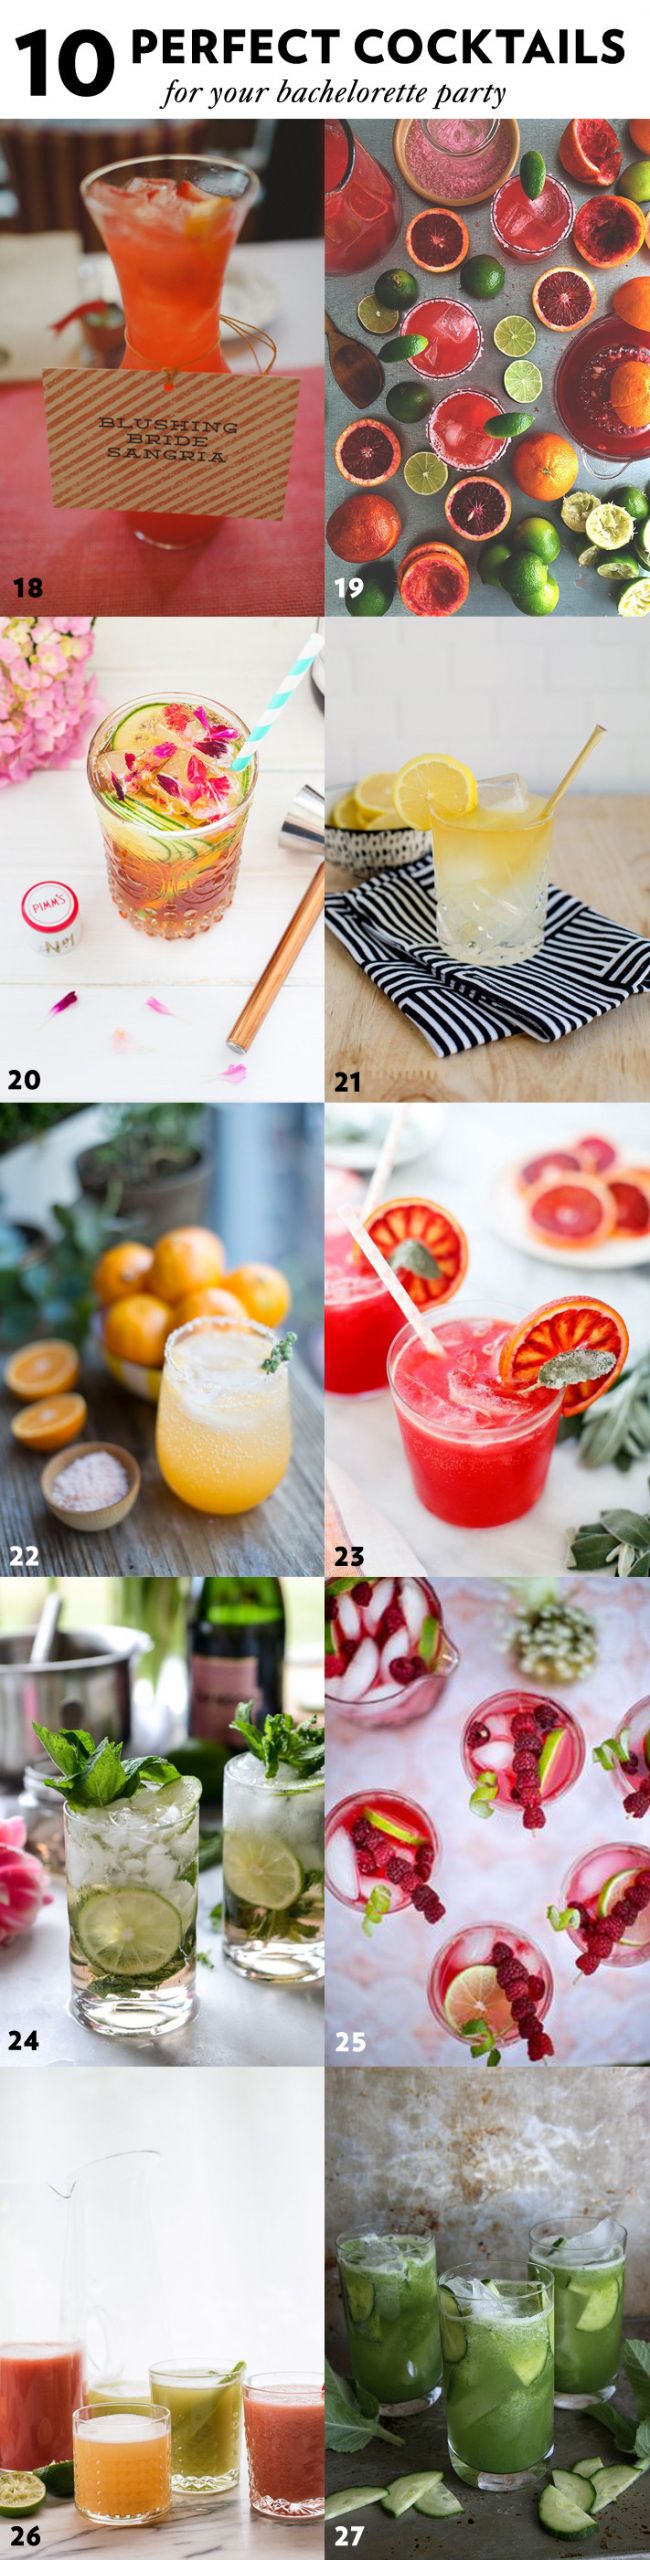 Bachelorette Party Drinks Ideas
 50 Food & Drink Ideas For Your Bridal Shower